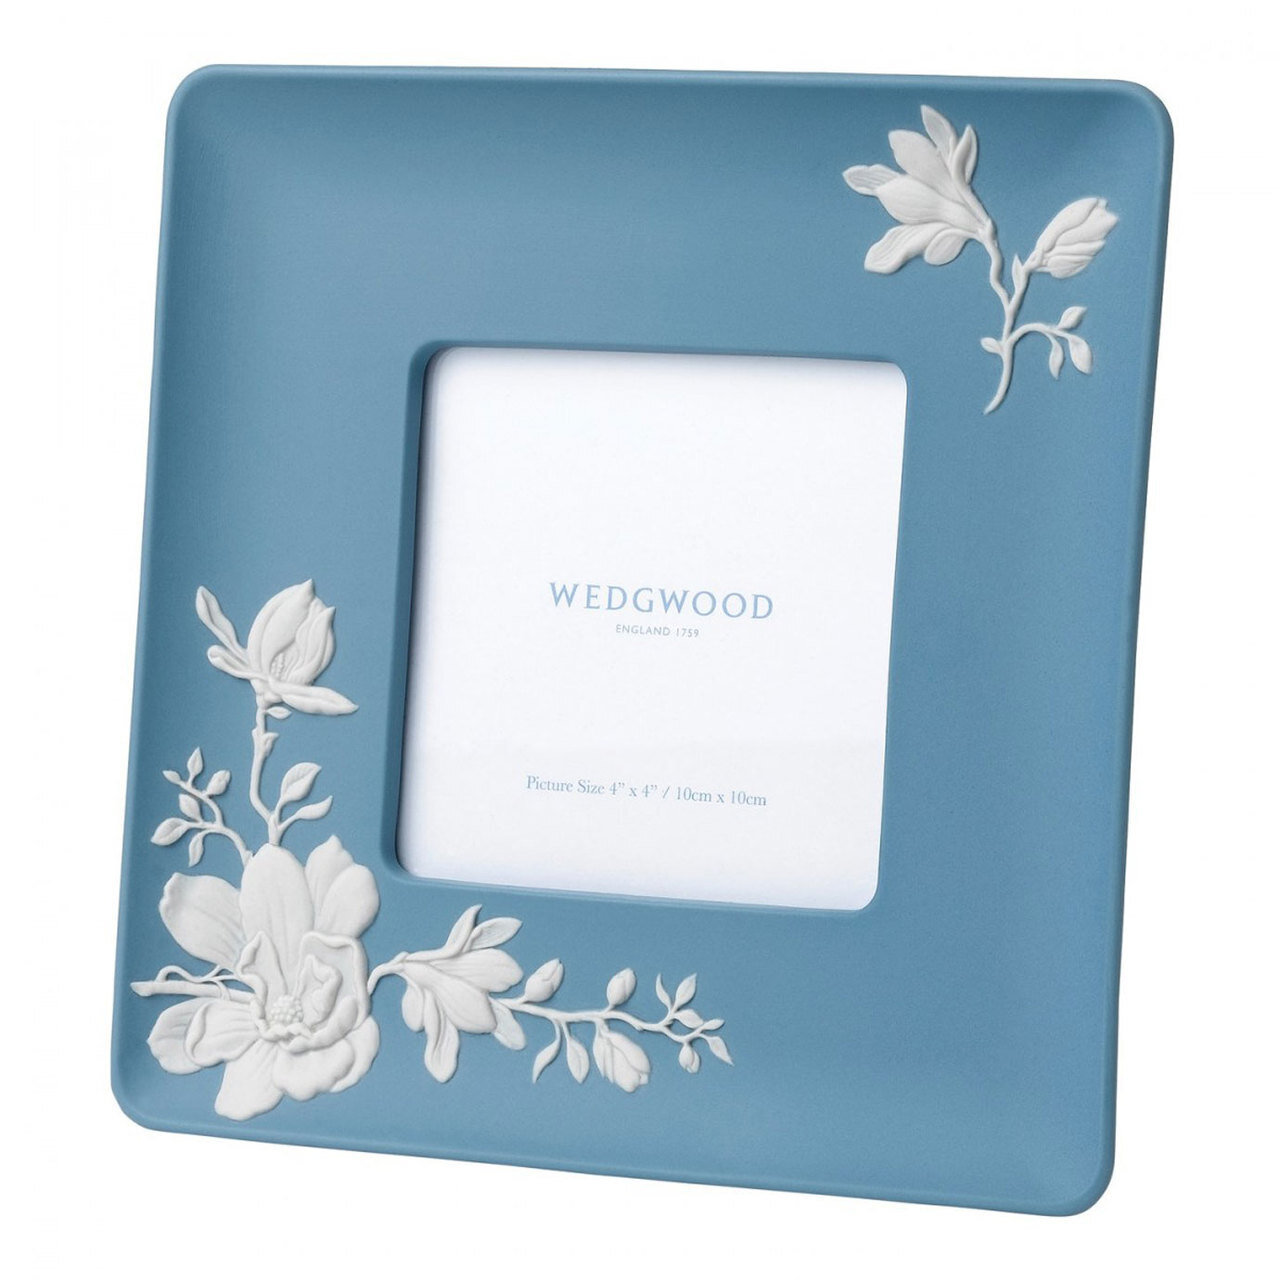 Wedgwood Magnolia Magnolia Blossom Picture Frame 4X4 Inch